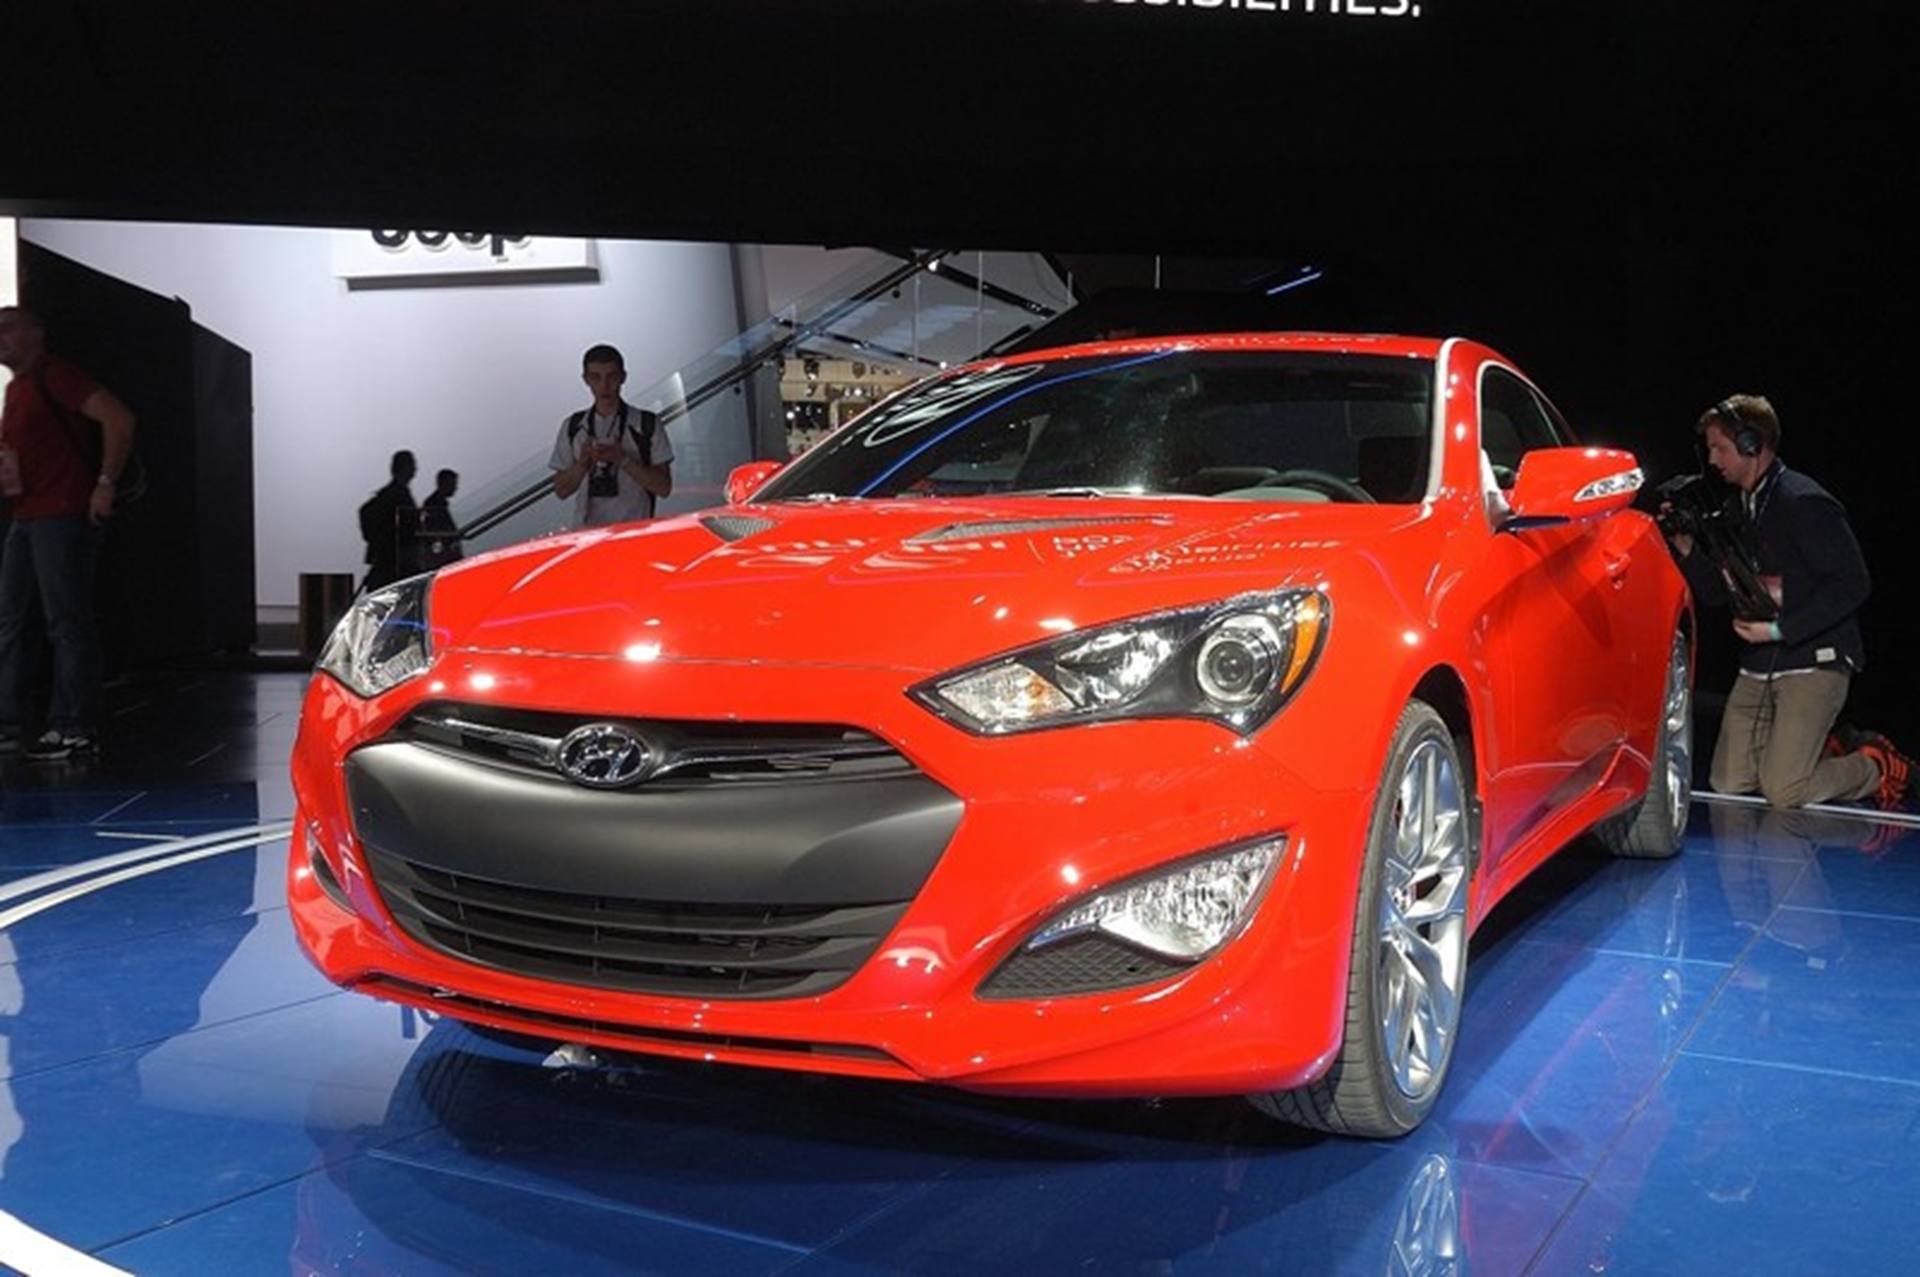 2013 GENESIS COUPE REVEALS MORE AGGRESSIVE DESIGN COUPLED WITH SERIOUS PERFORMANCE CREDENTIALS